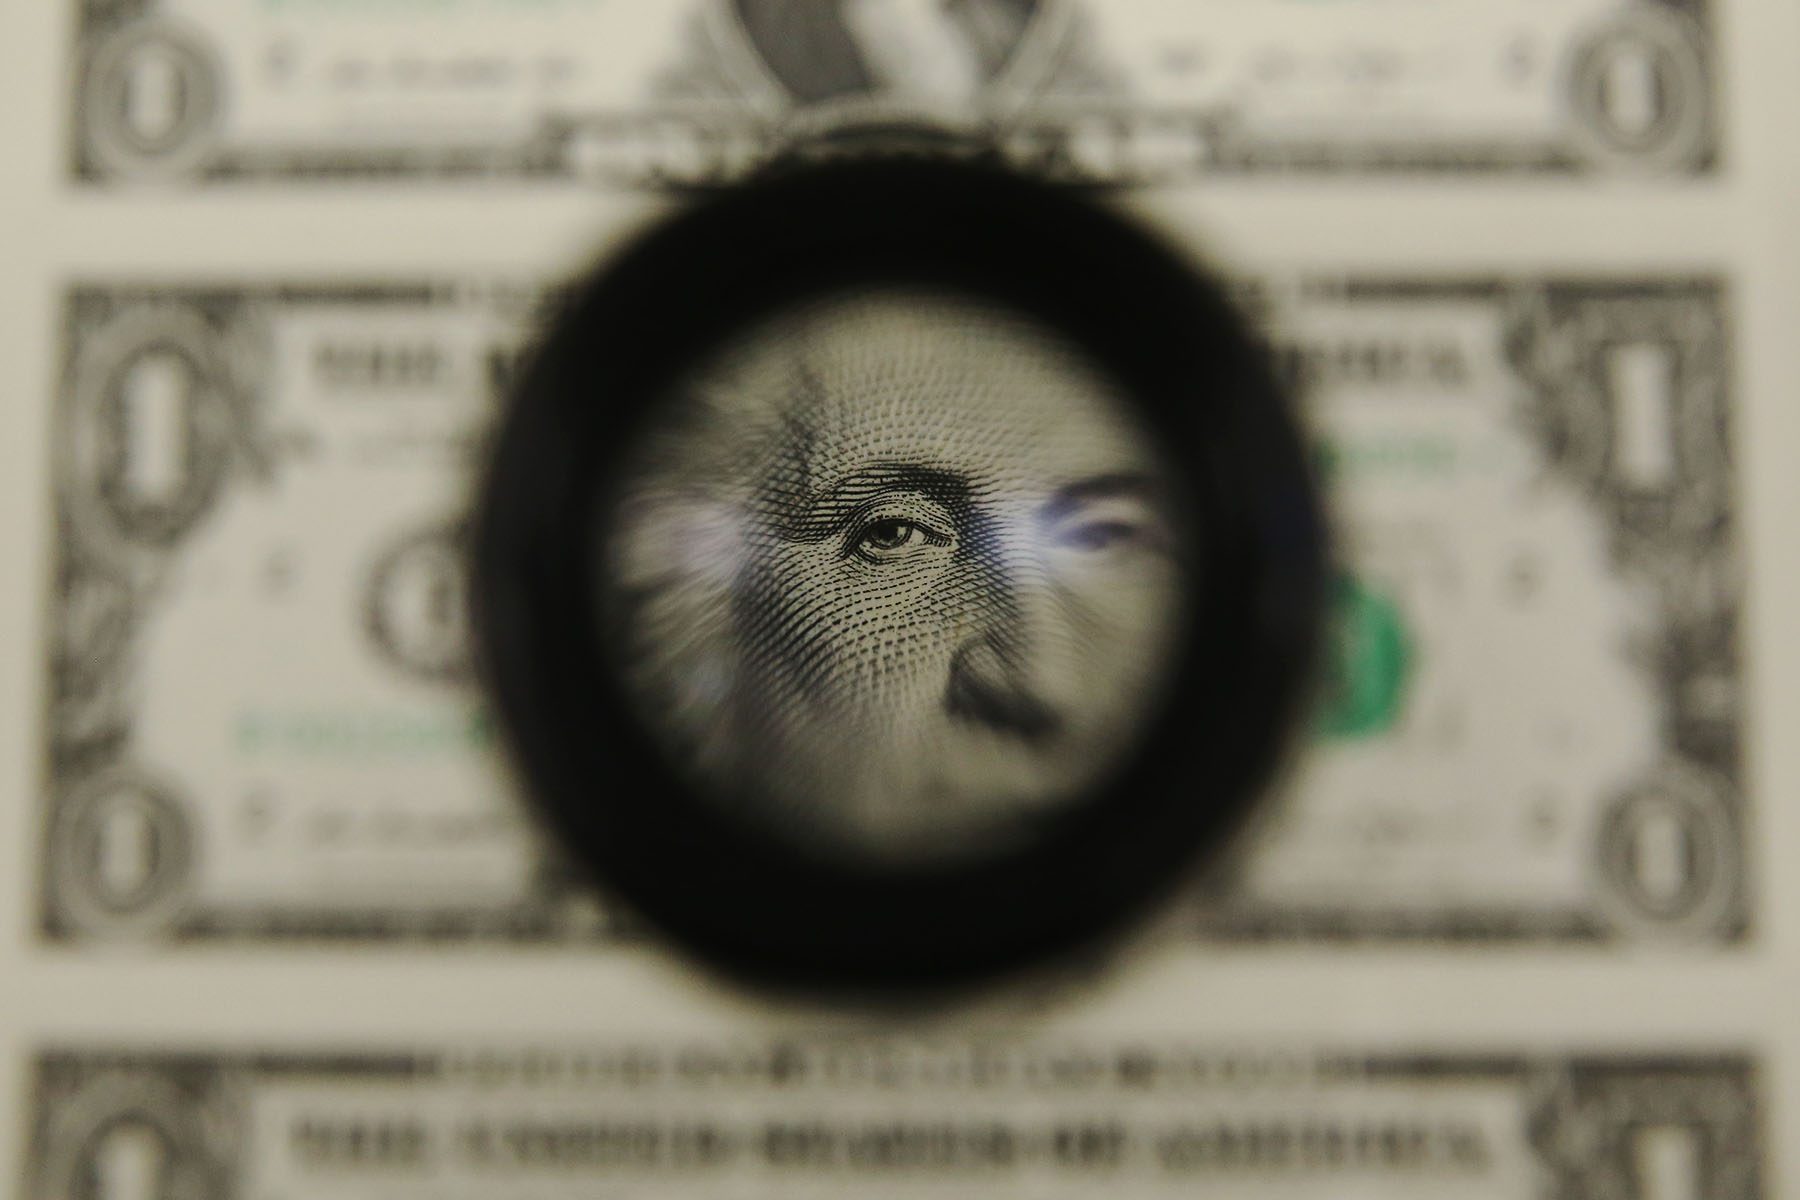 A magnifying glass is used to inspect newly printed one dollar bills at the Bureau of Engraving and Printing.